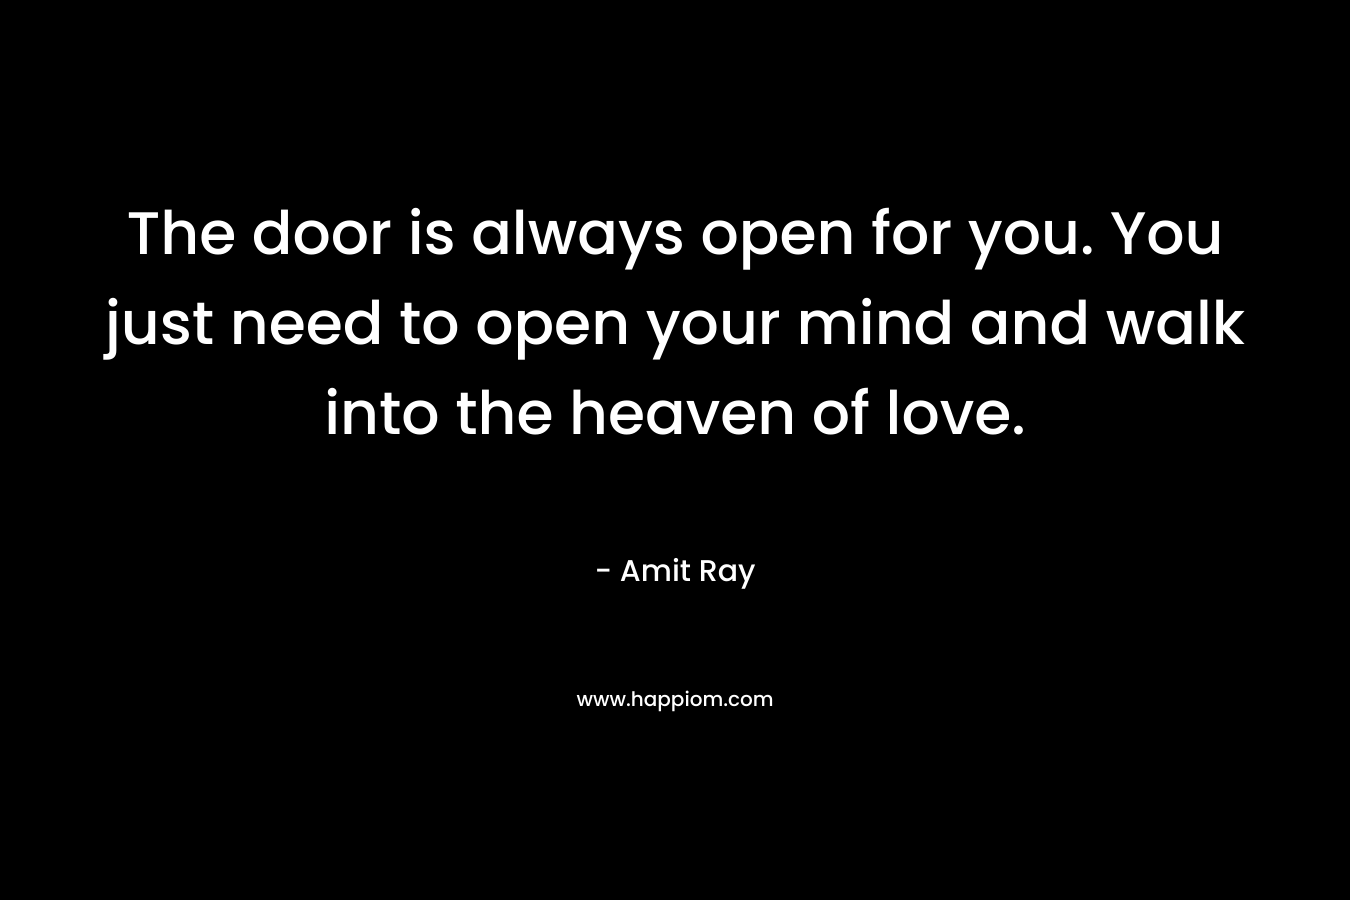 The door is always open for you. You just need to open your mind and walk into the heaven of love.